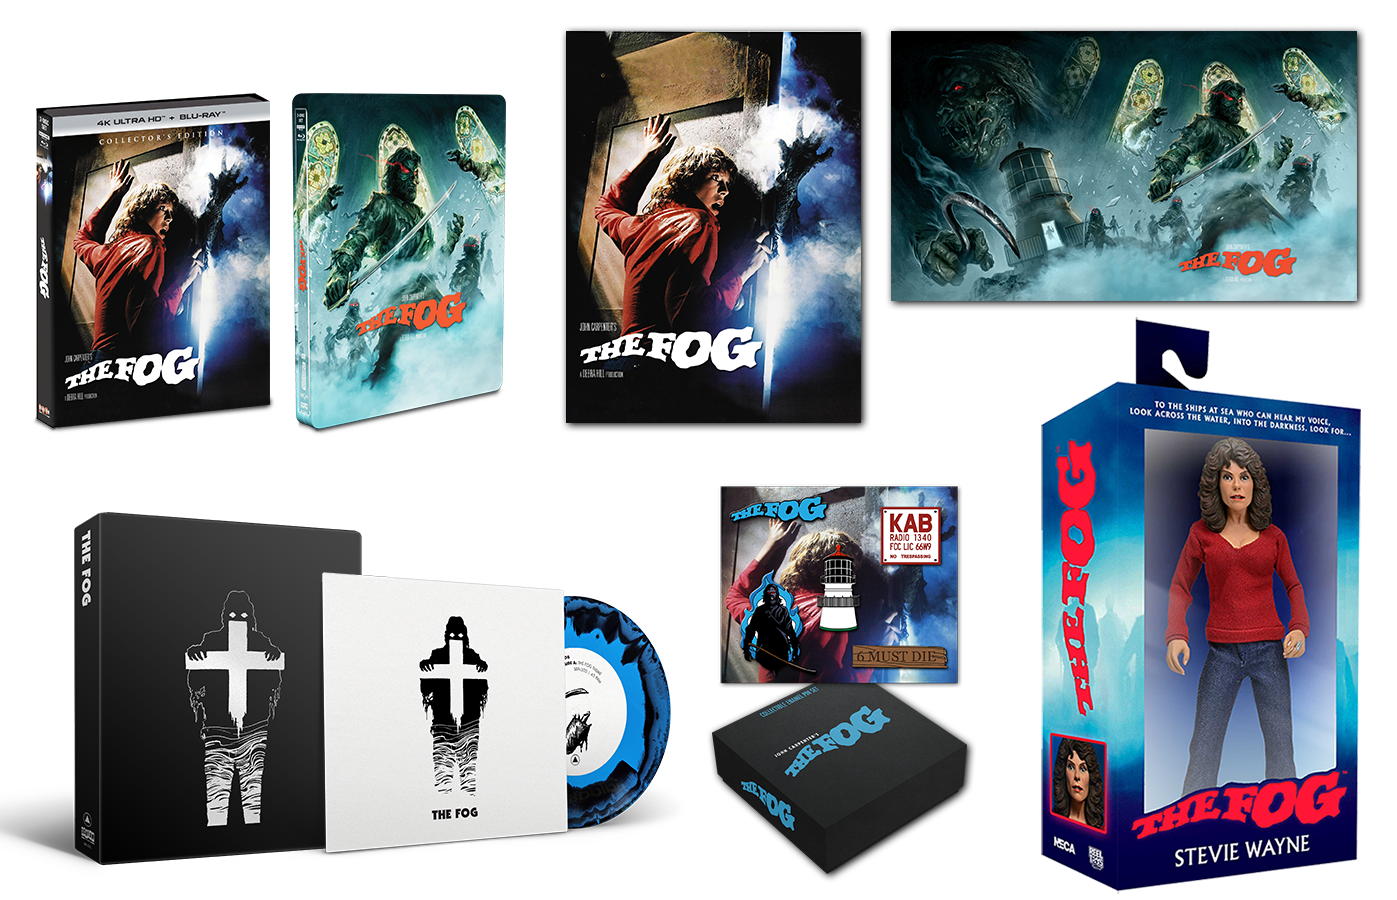 The Fog [Collector's Edition] + [Limited Edition Steelbook] + NECA Figure + 7" Vinyl + 2 Posters + Enamel Pin Set - Shout! Factory